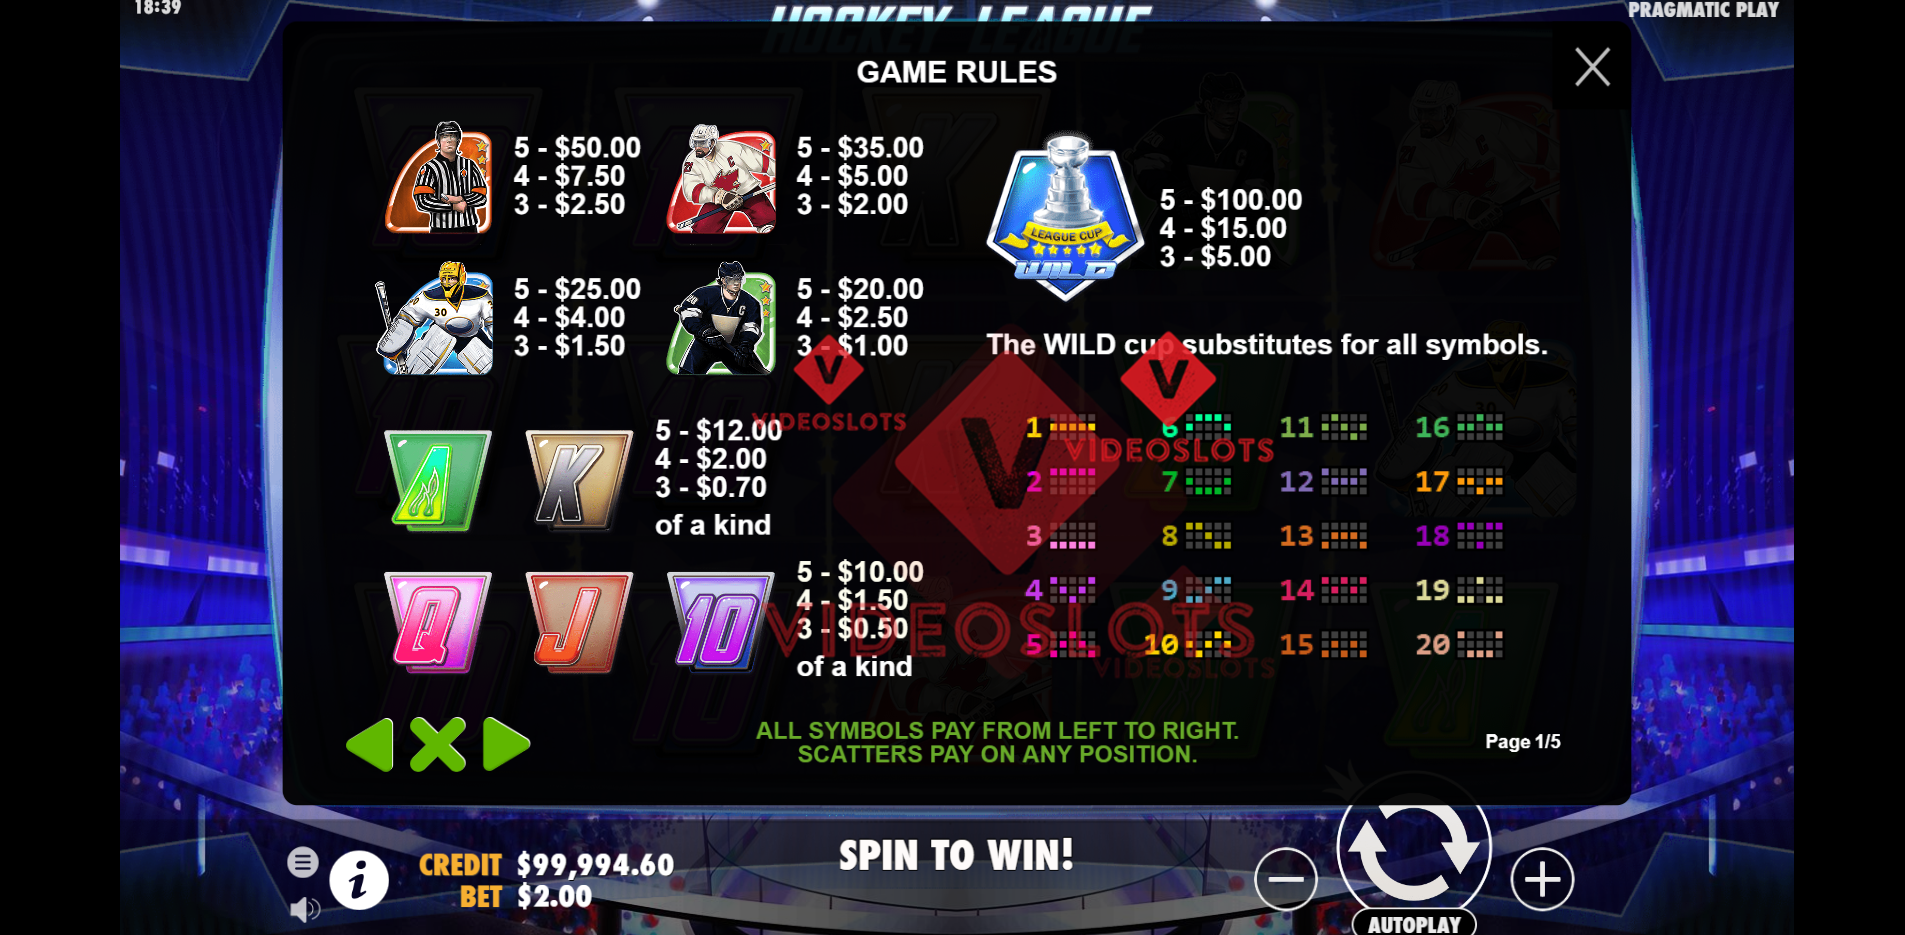 Pay Table for Hockey League slot by Pragmatic Play